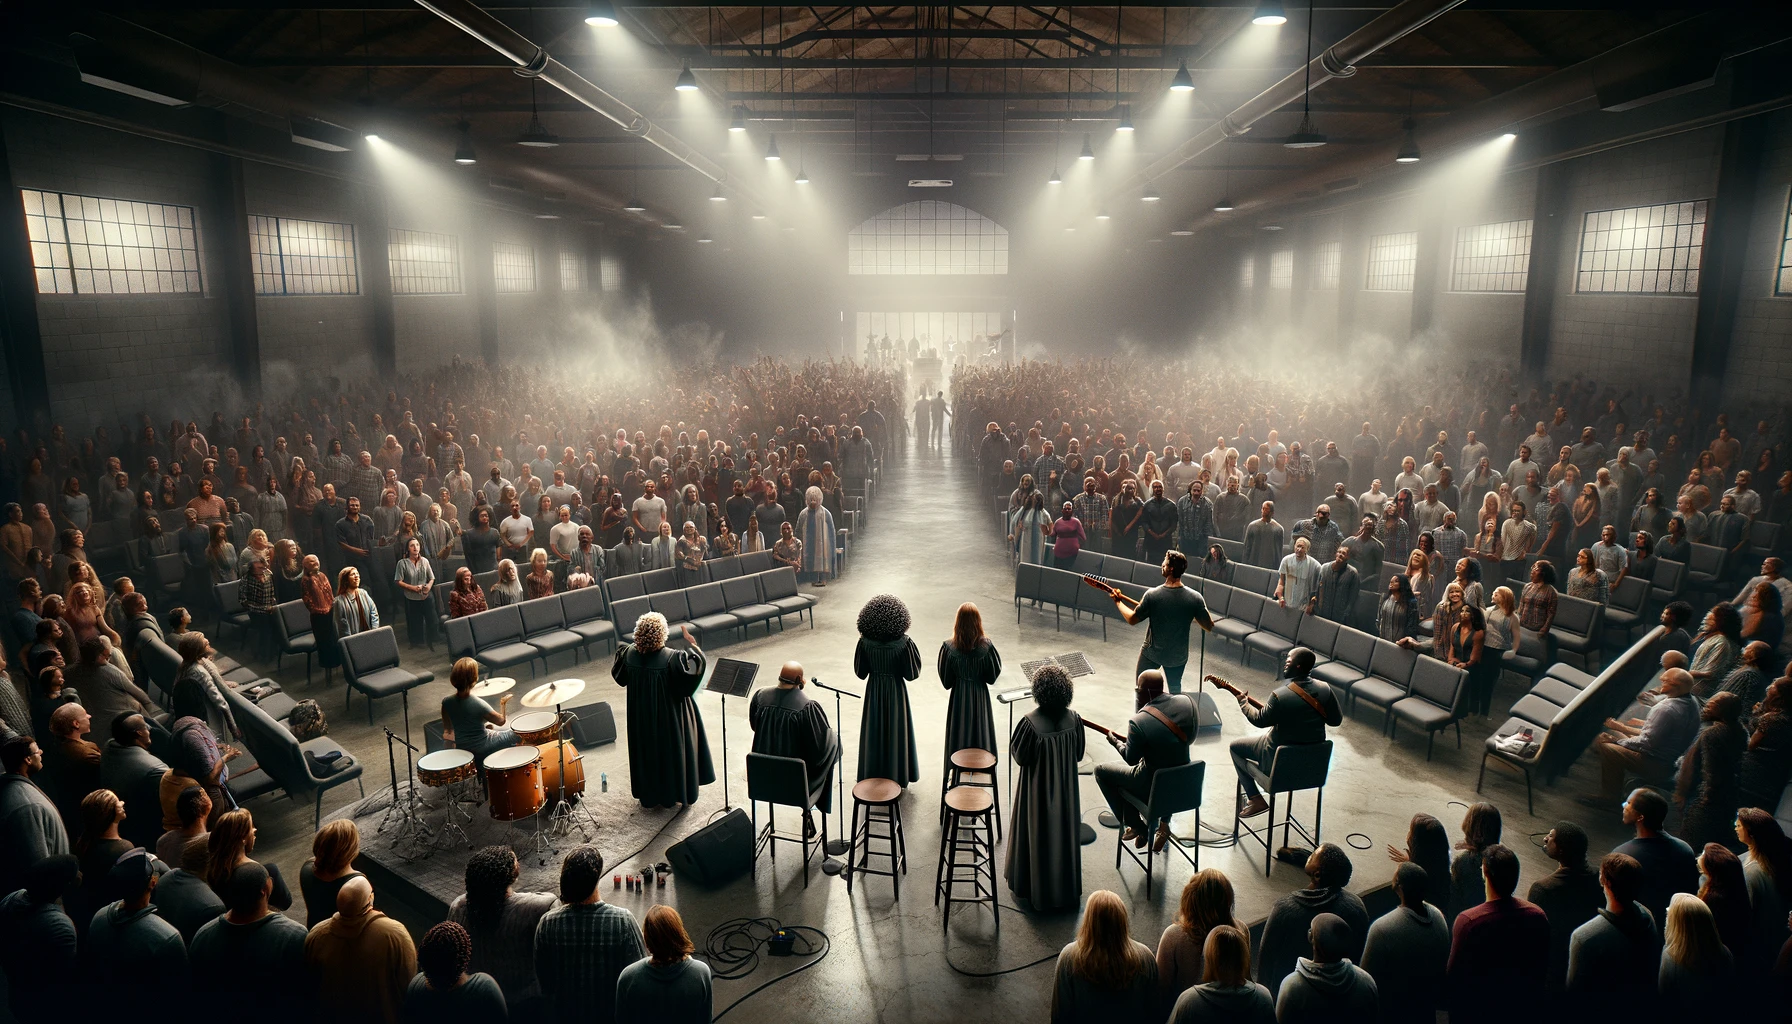 A lively scene of a new church's first Sunday service inside a packed, windowless sanctuary. The room is dark with fog on the stage, illuminated only by stage lights like a rock concert. The congregation is seated in charcoal-colored chairs on a concrete floor. There is no second deck, just blank walls. On stage, there is a full band: a drummer, two electric guitar players, a bass player, two singers, and a white rapper. The pastor, a man playing an acoustic guitar, stands with the band. In front of the stage, five black women in robes are singing on stool-like mechanisms that raise and lower them for dramatic effect. They, along with the band, are facing the crowd. A 6-foot-3 white male with dark hair and a heavier build, not wearing a robe, stands in the middle of the choir, singing joyfully. The atmosphere is filled with joy, community spirit, and vibrant energy.